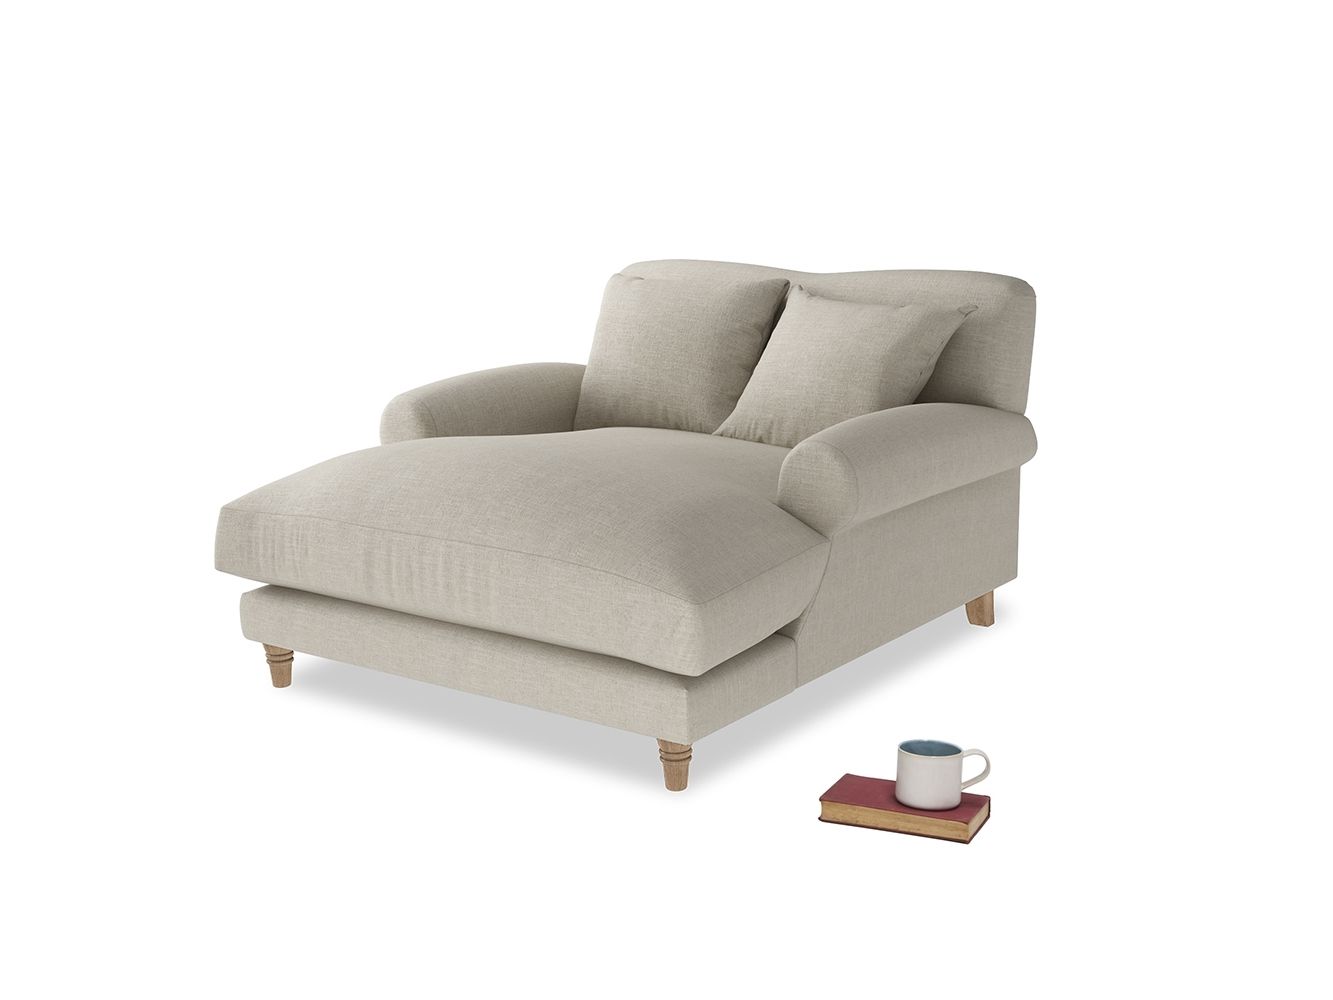 Trendy Loveseats With Chaise Lounge Inside Crumpet Love Seat Chaise (View 7 of 15)